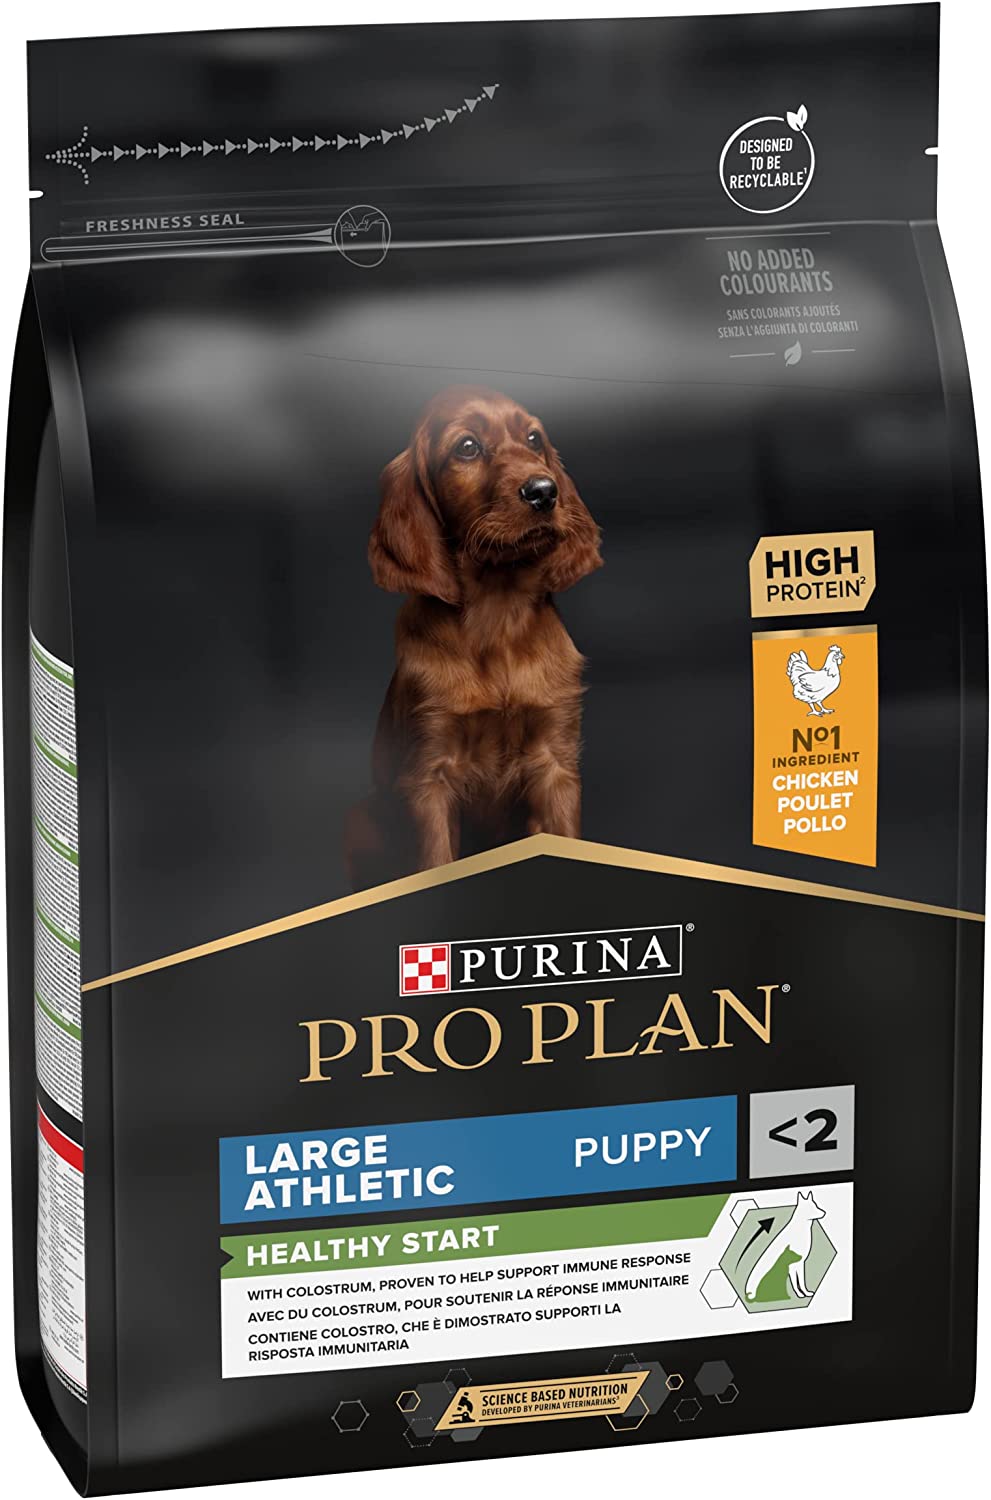 Purina Pro Plan Large Athletic Puppy Chicken 3Kg